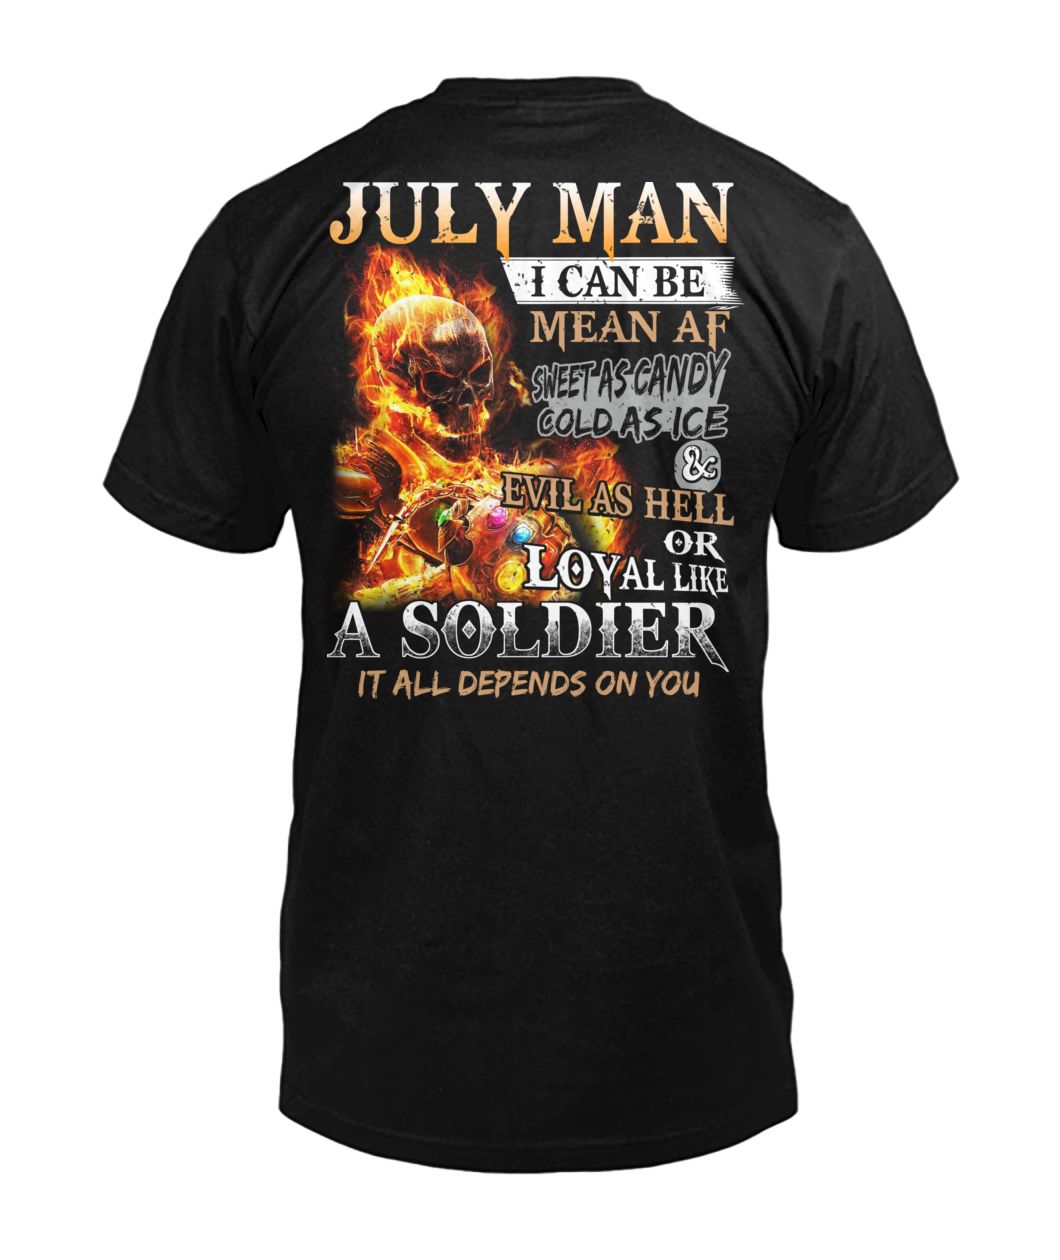 July man I can be mean af sweet as candy gold as ice and evil as hell mens v-neck